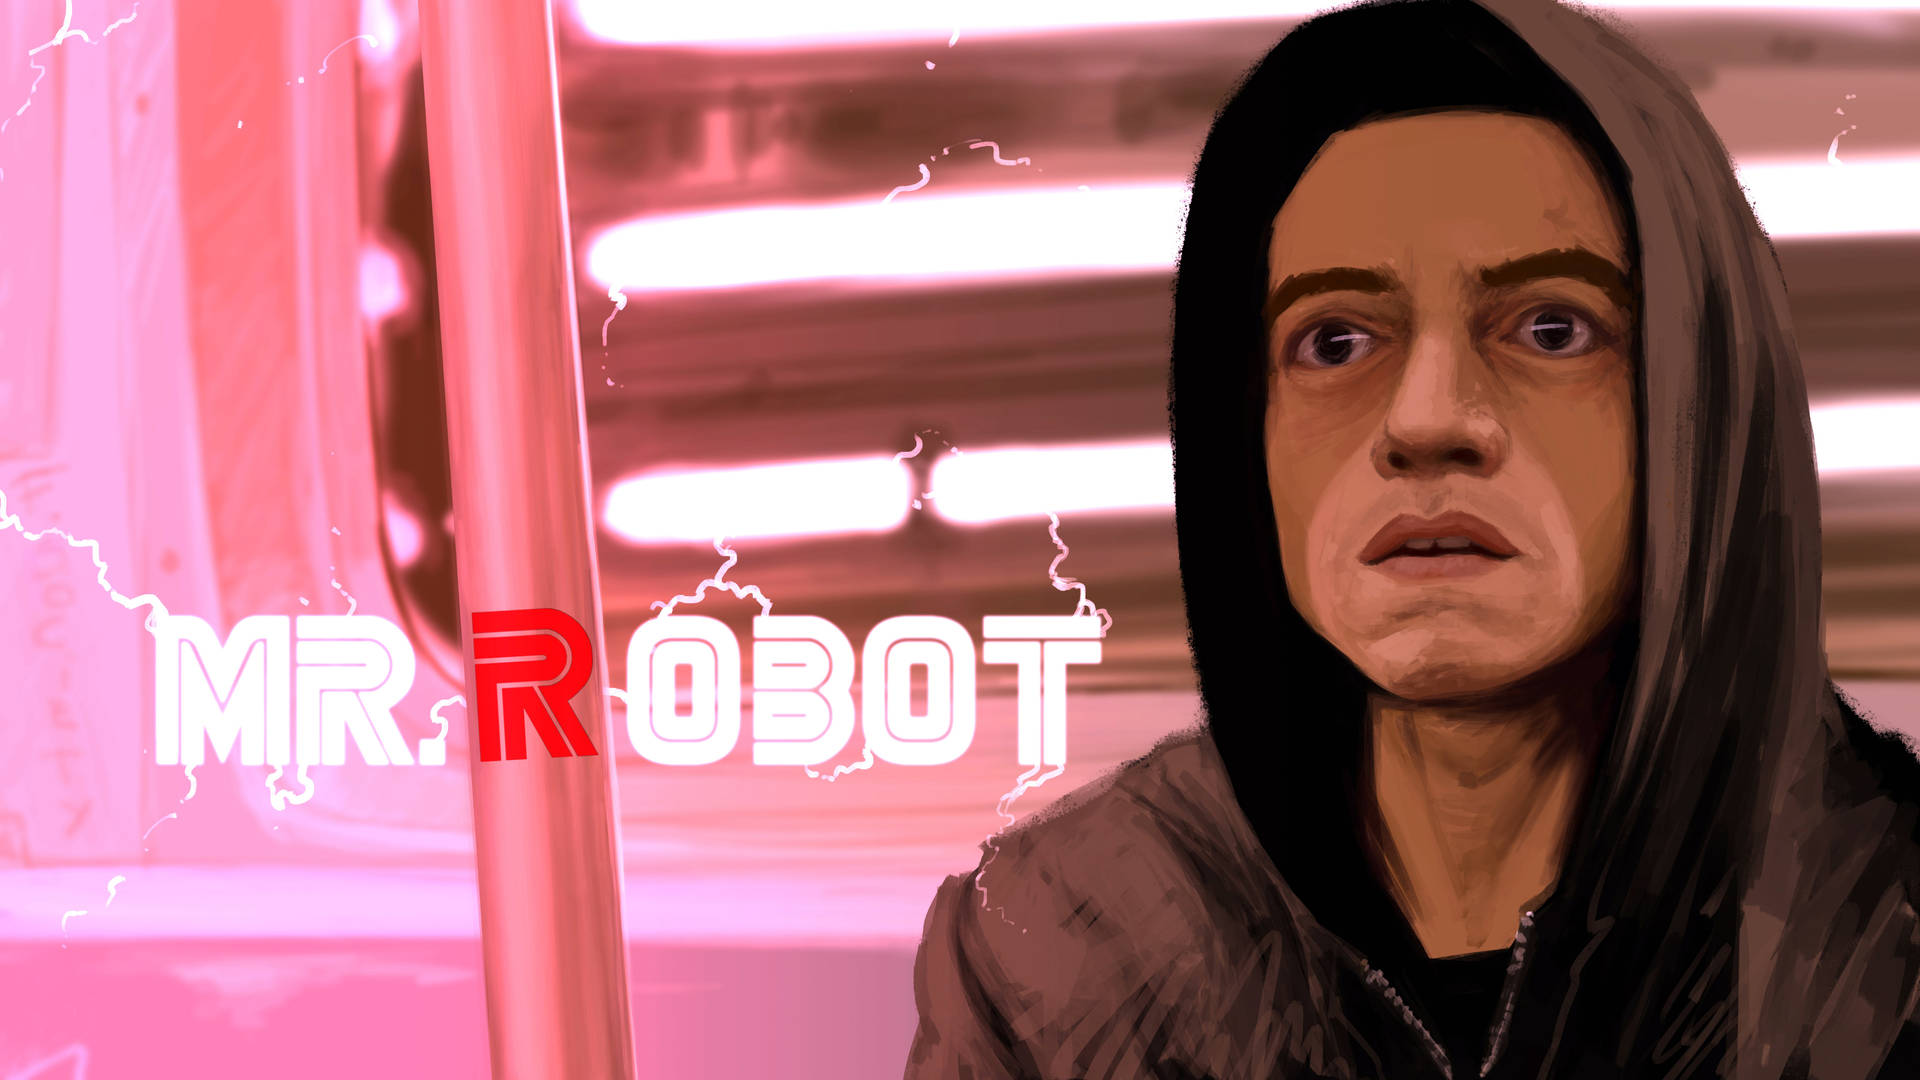 4096X2304 Mr Robot Wallpaper and Background